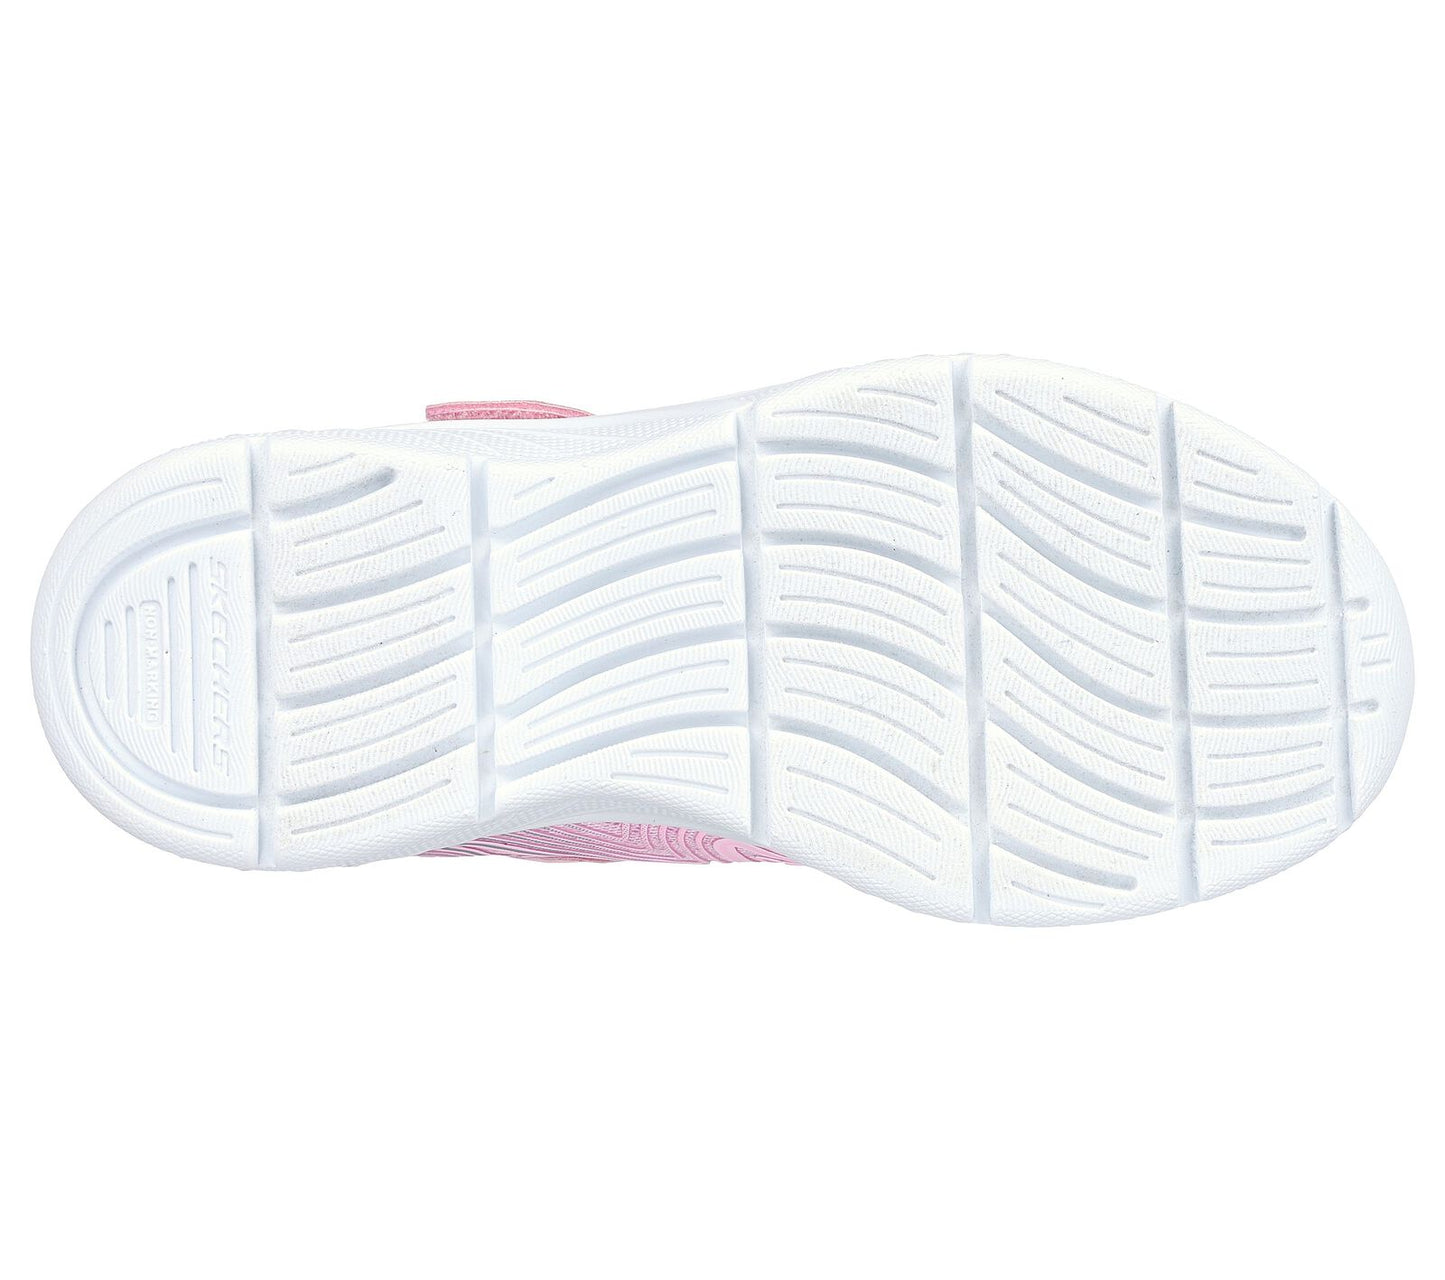 Skechers Swirl Sweet in pink, featuring the Skechers logo. Velcro fastening with flat elastic bungee laces. Sole view.